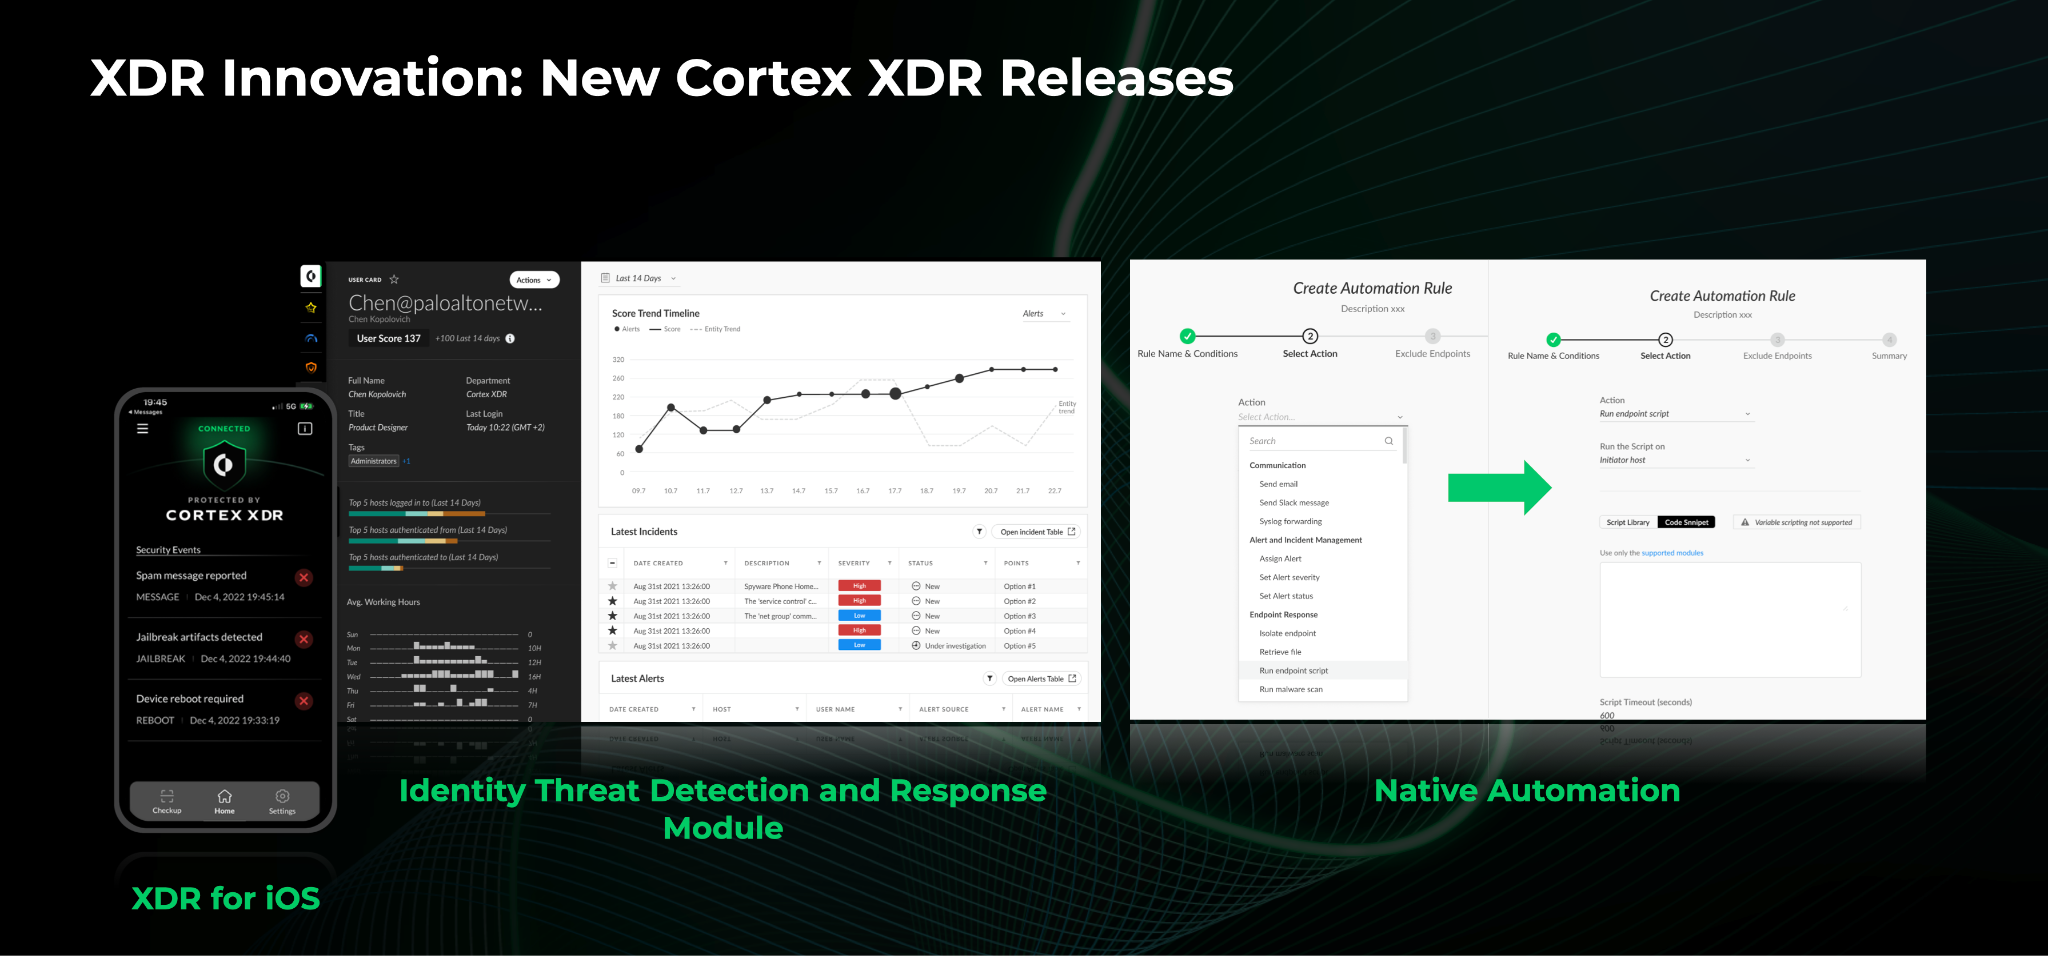 XDR Innovation: New Cortex XDR Releases